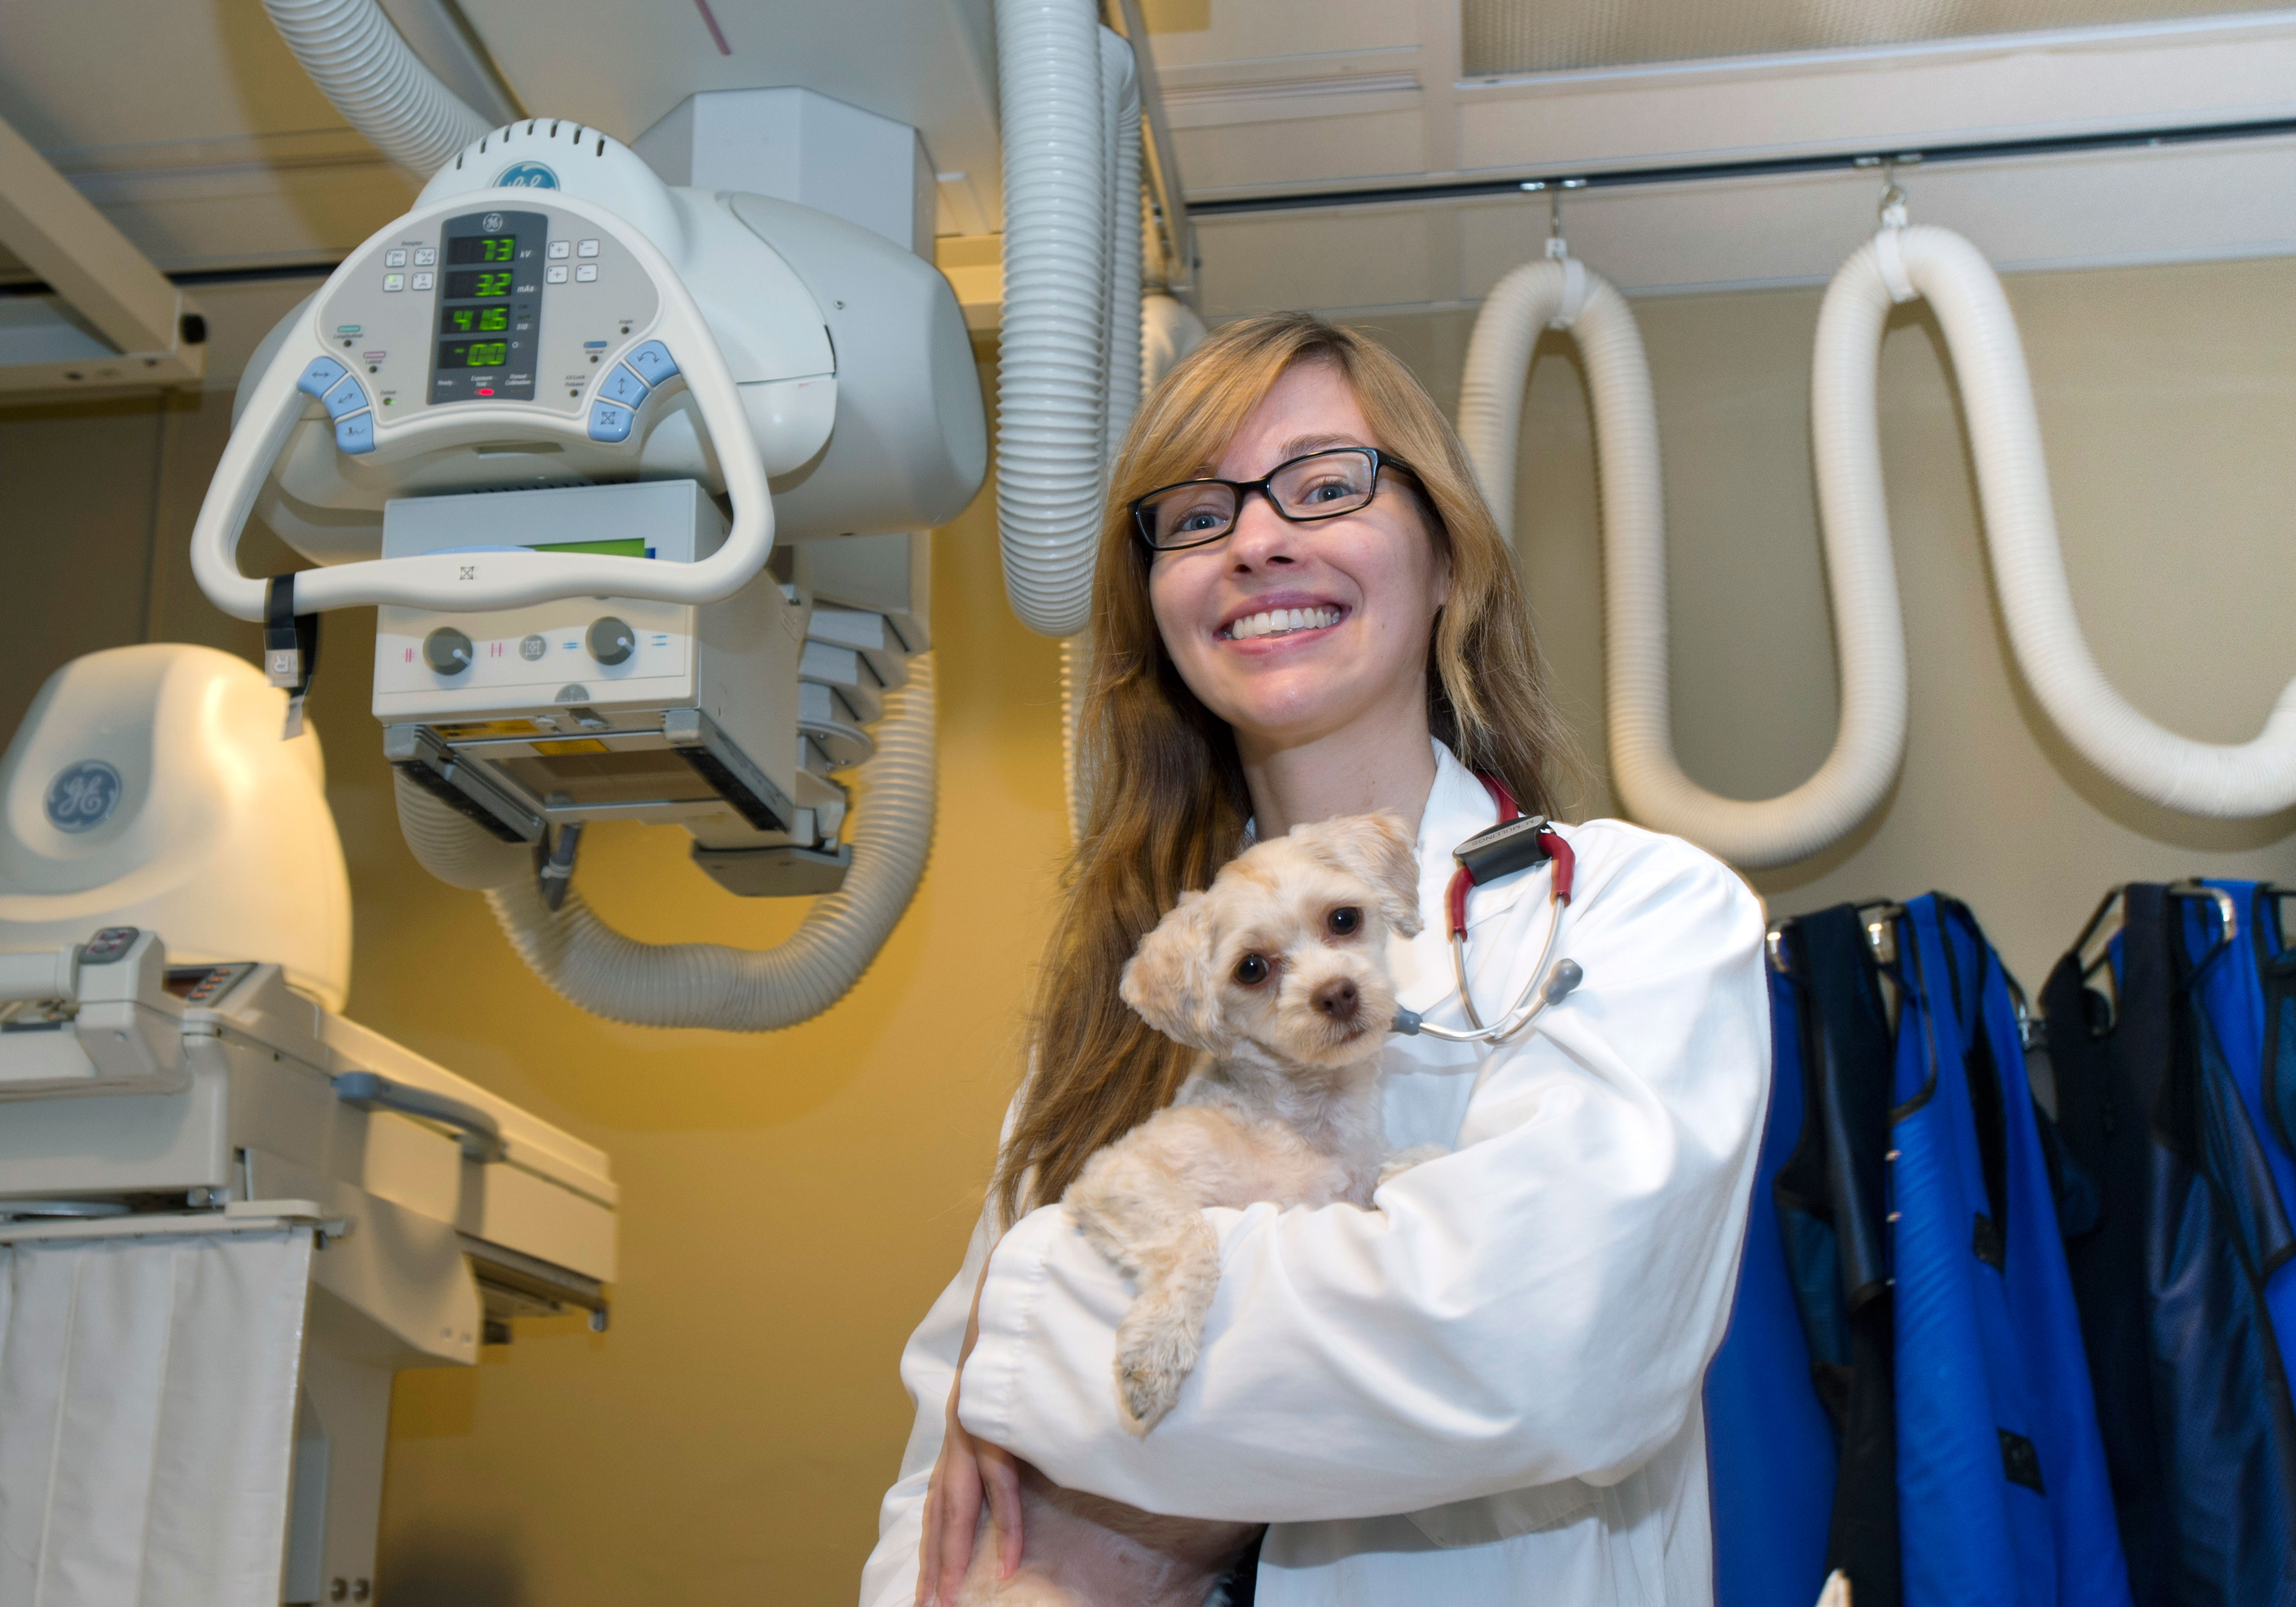 University of Guelph professor Michelle Oblak used titanium mesh to protect the brain of companion dog Ella, who is now thriving.